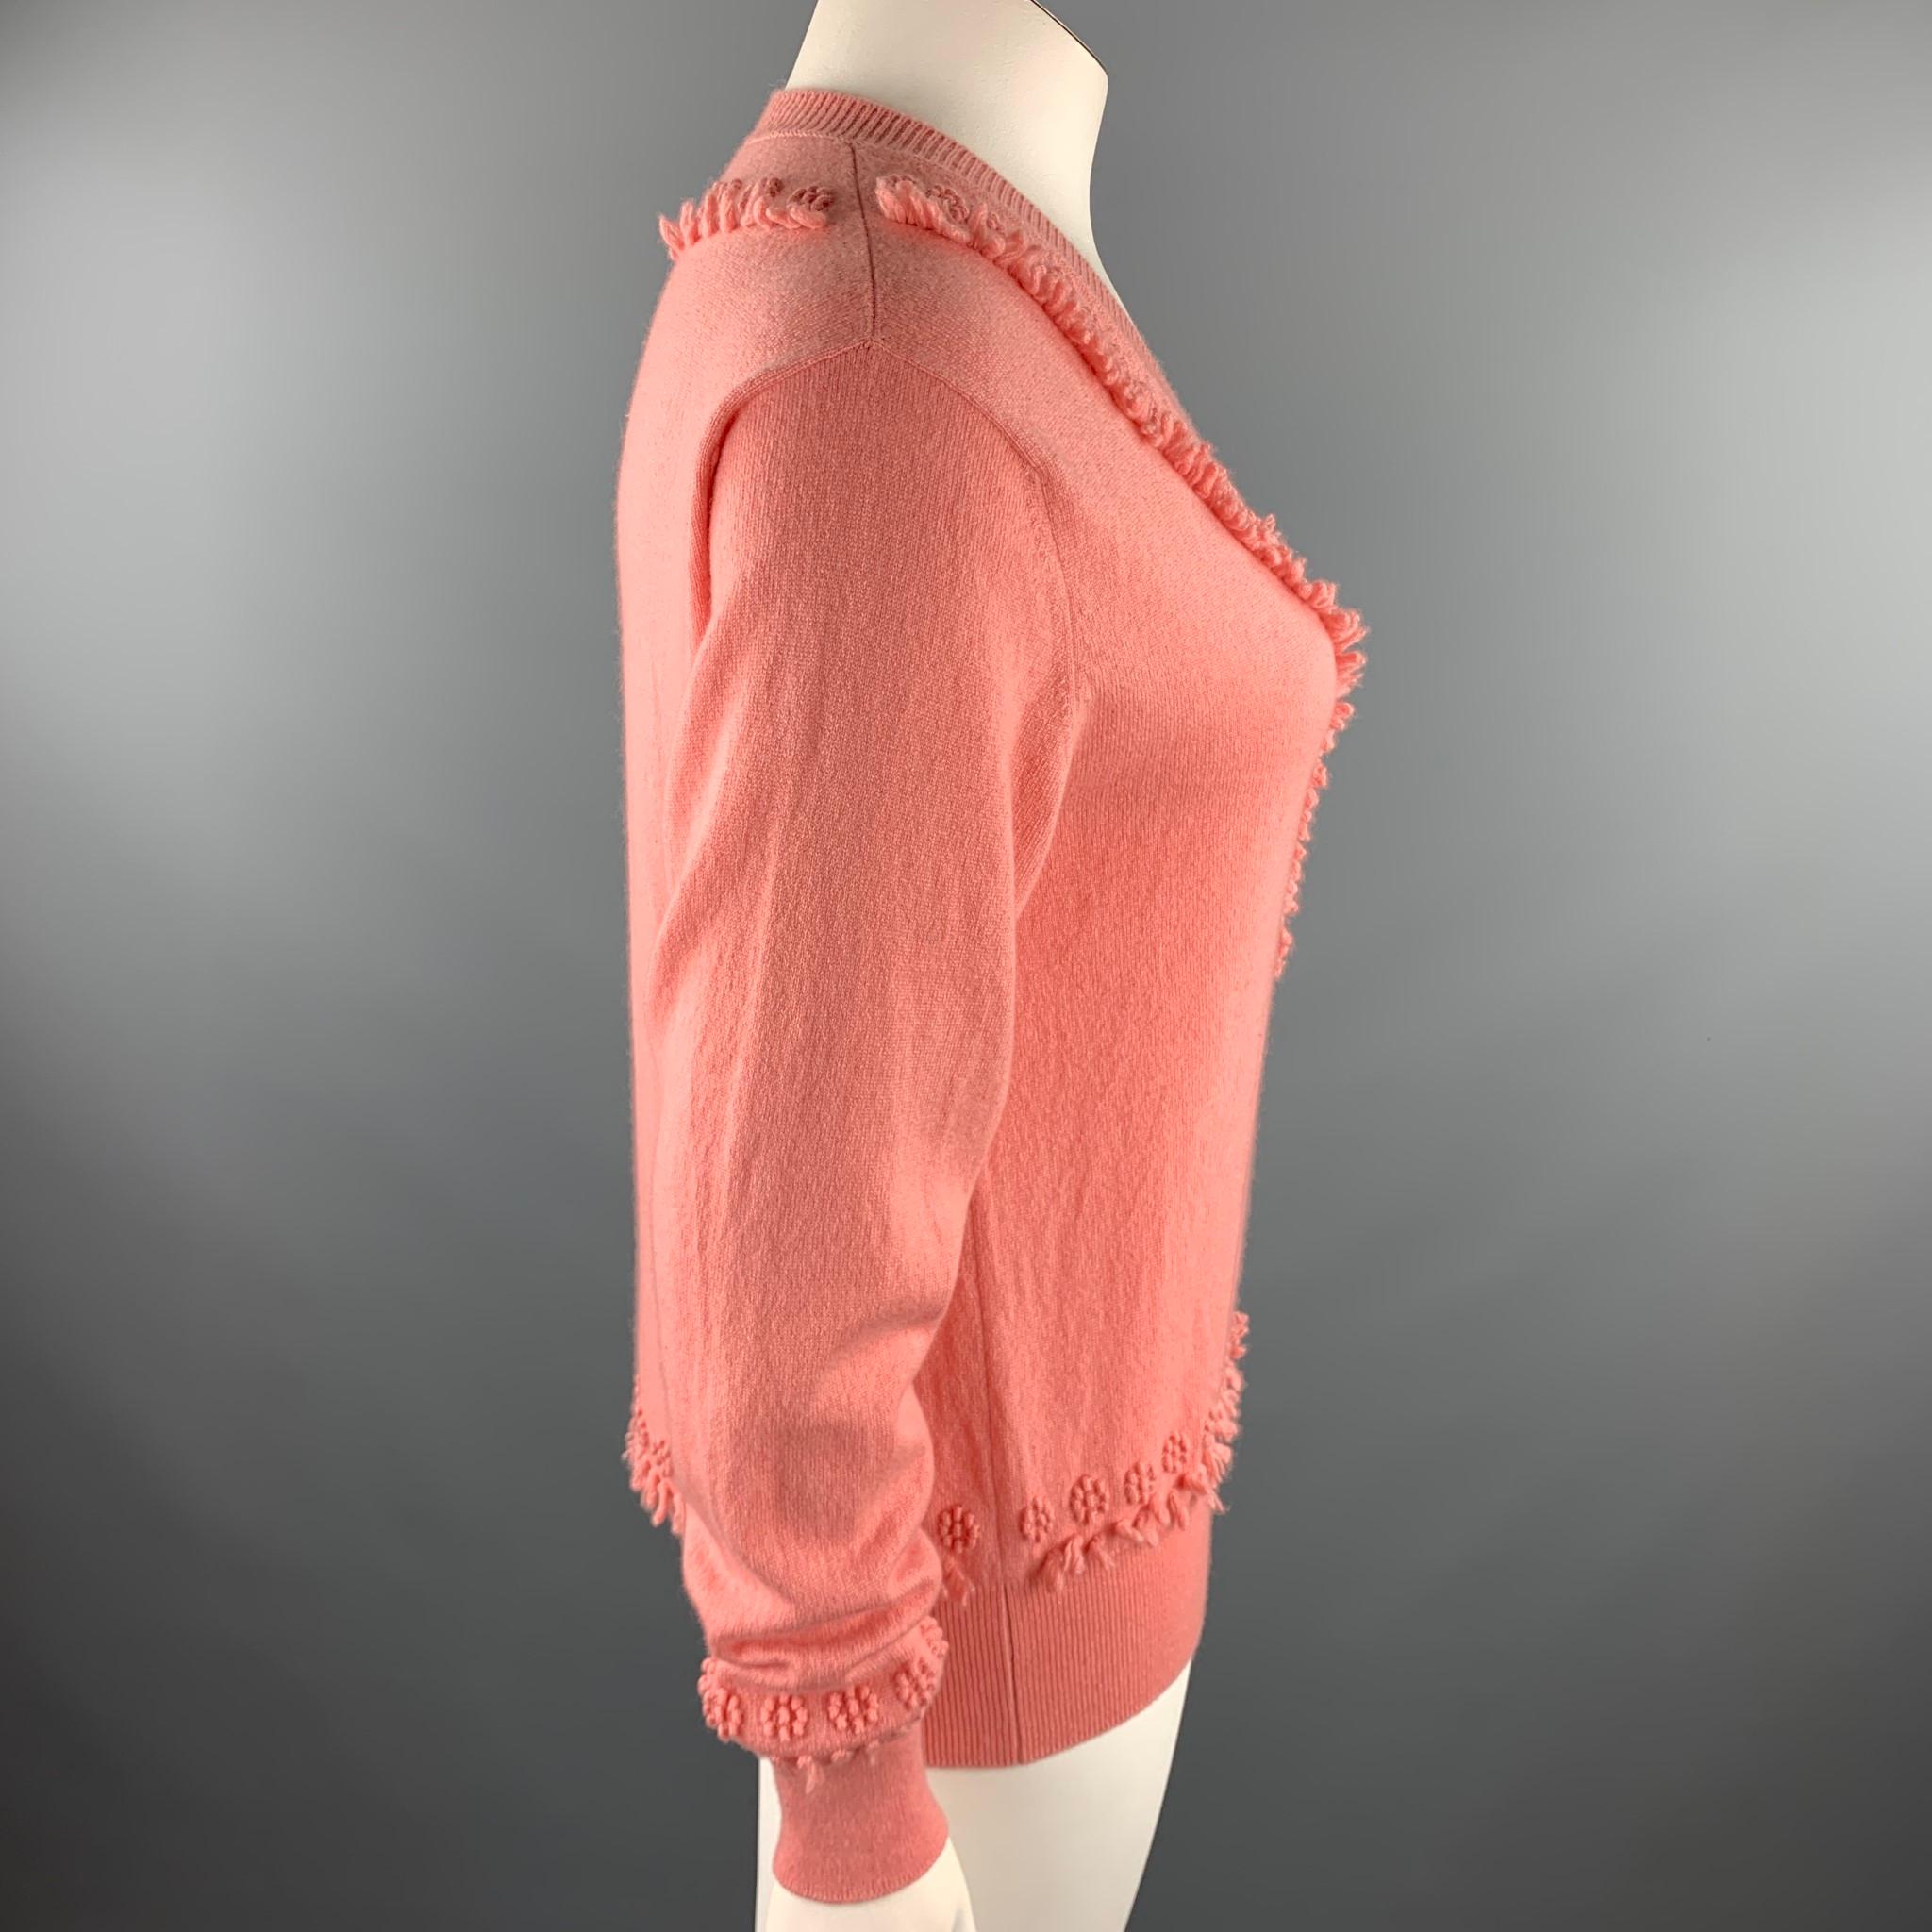 Orange BARRIE Size XL Salmon Pink Knitted Cashmere Sweater